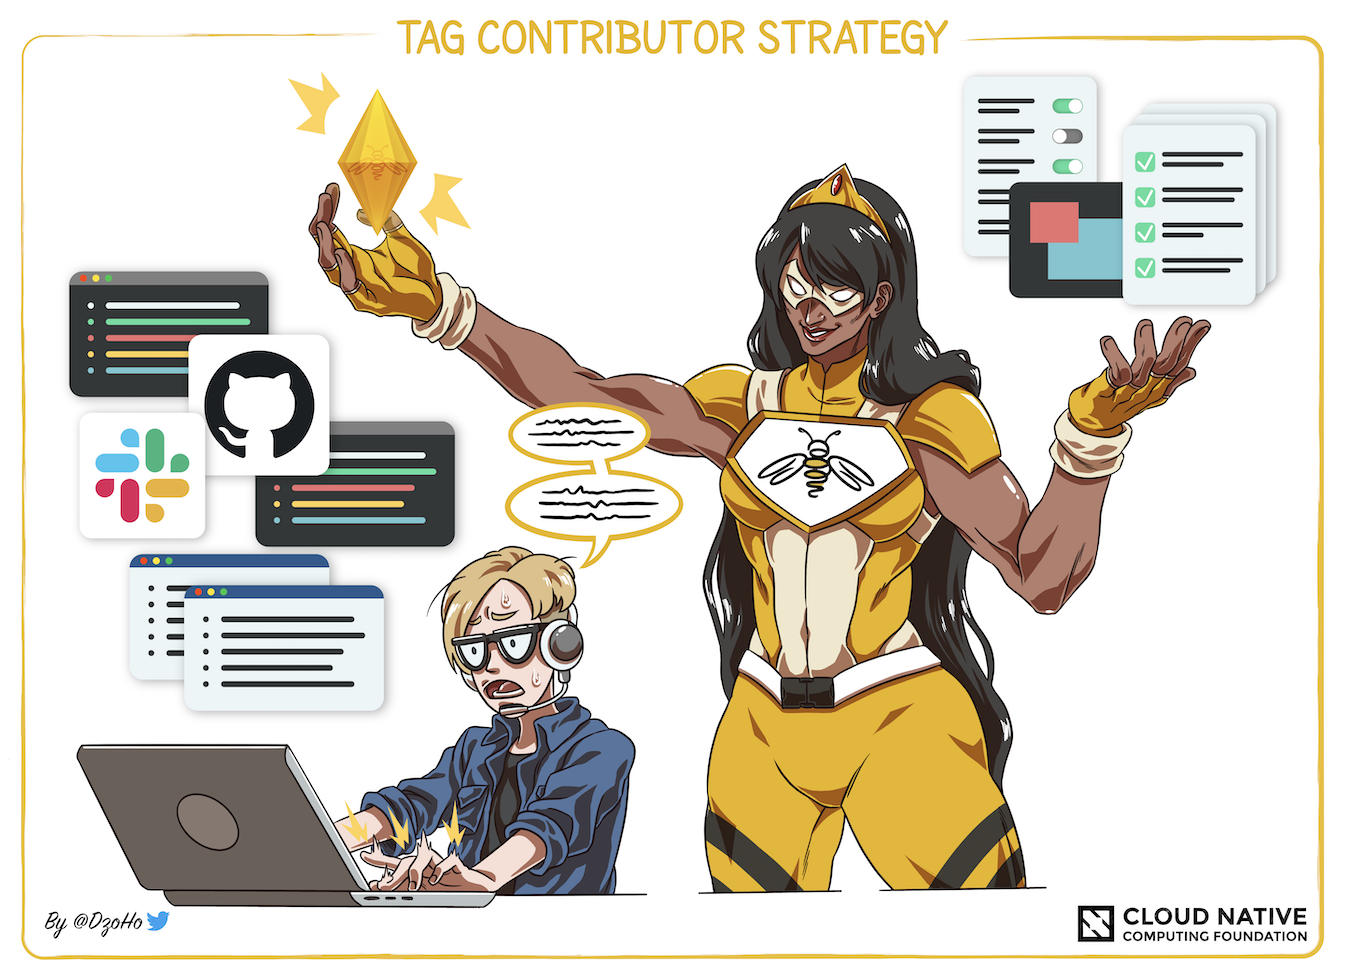 Illustration by DzoHo shows a lady (dressed up on wonderwoman costume with Tag Contributor Strategy logo) presenting a gem to a gentleman with glasses and headphone looking frustrated working on his computer